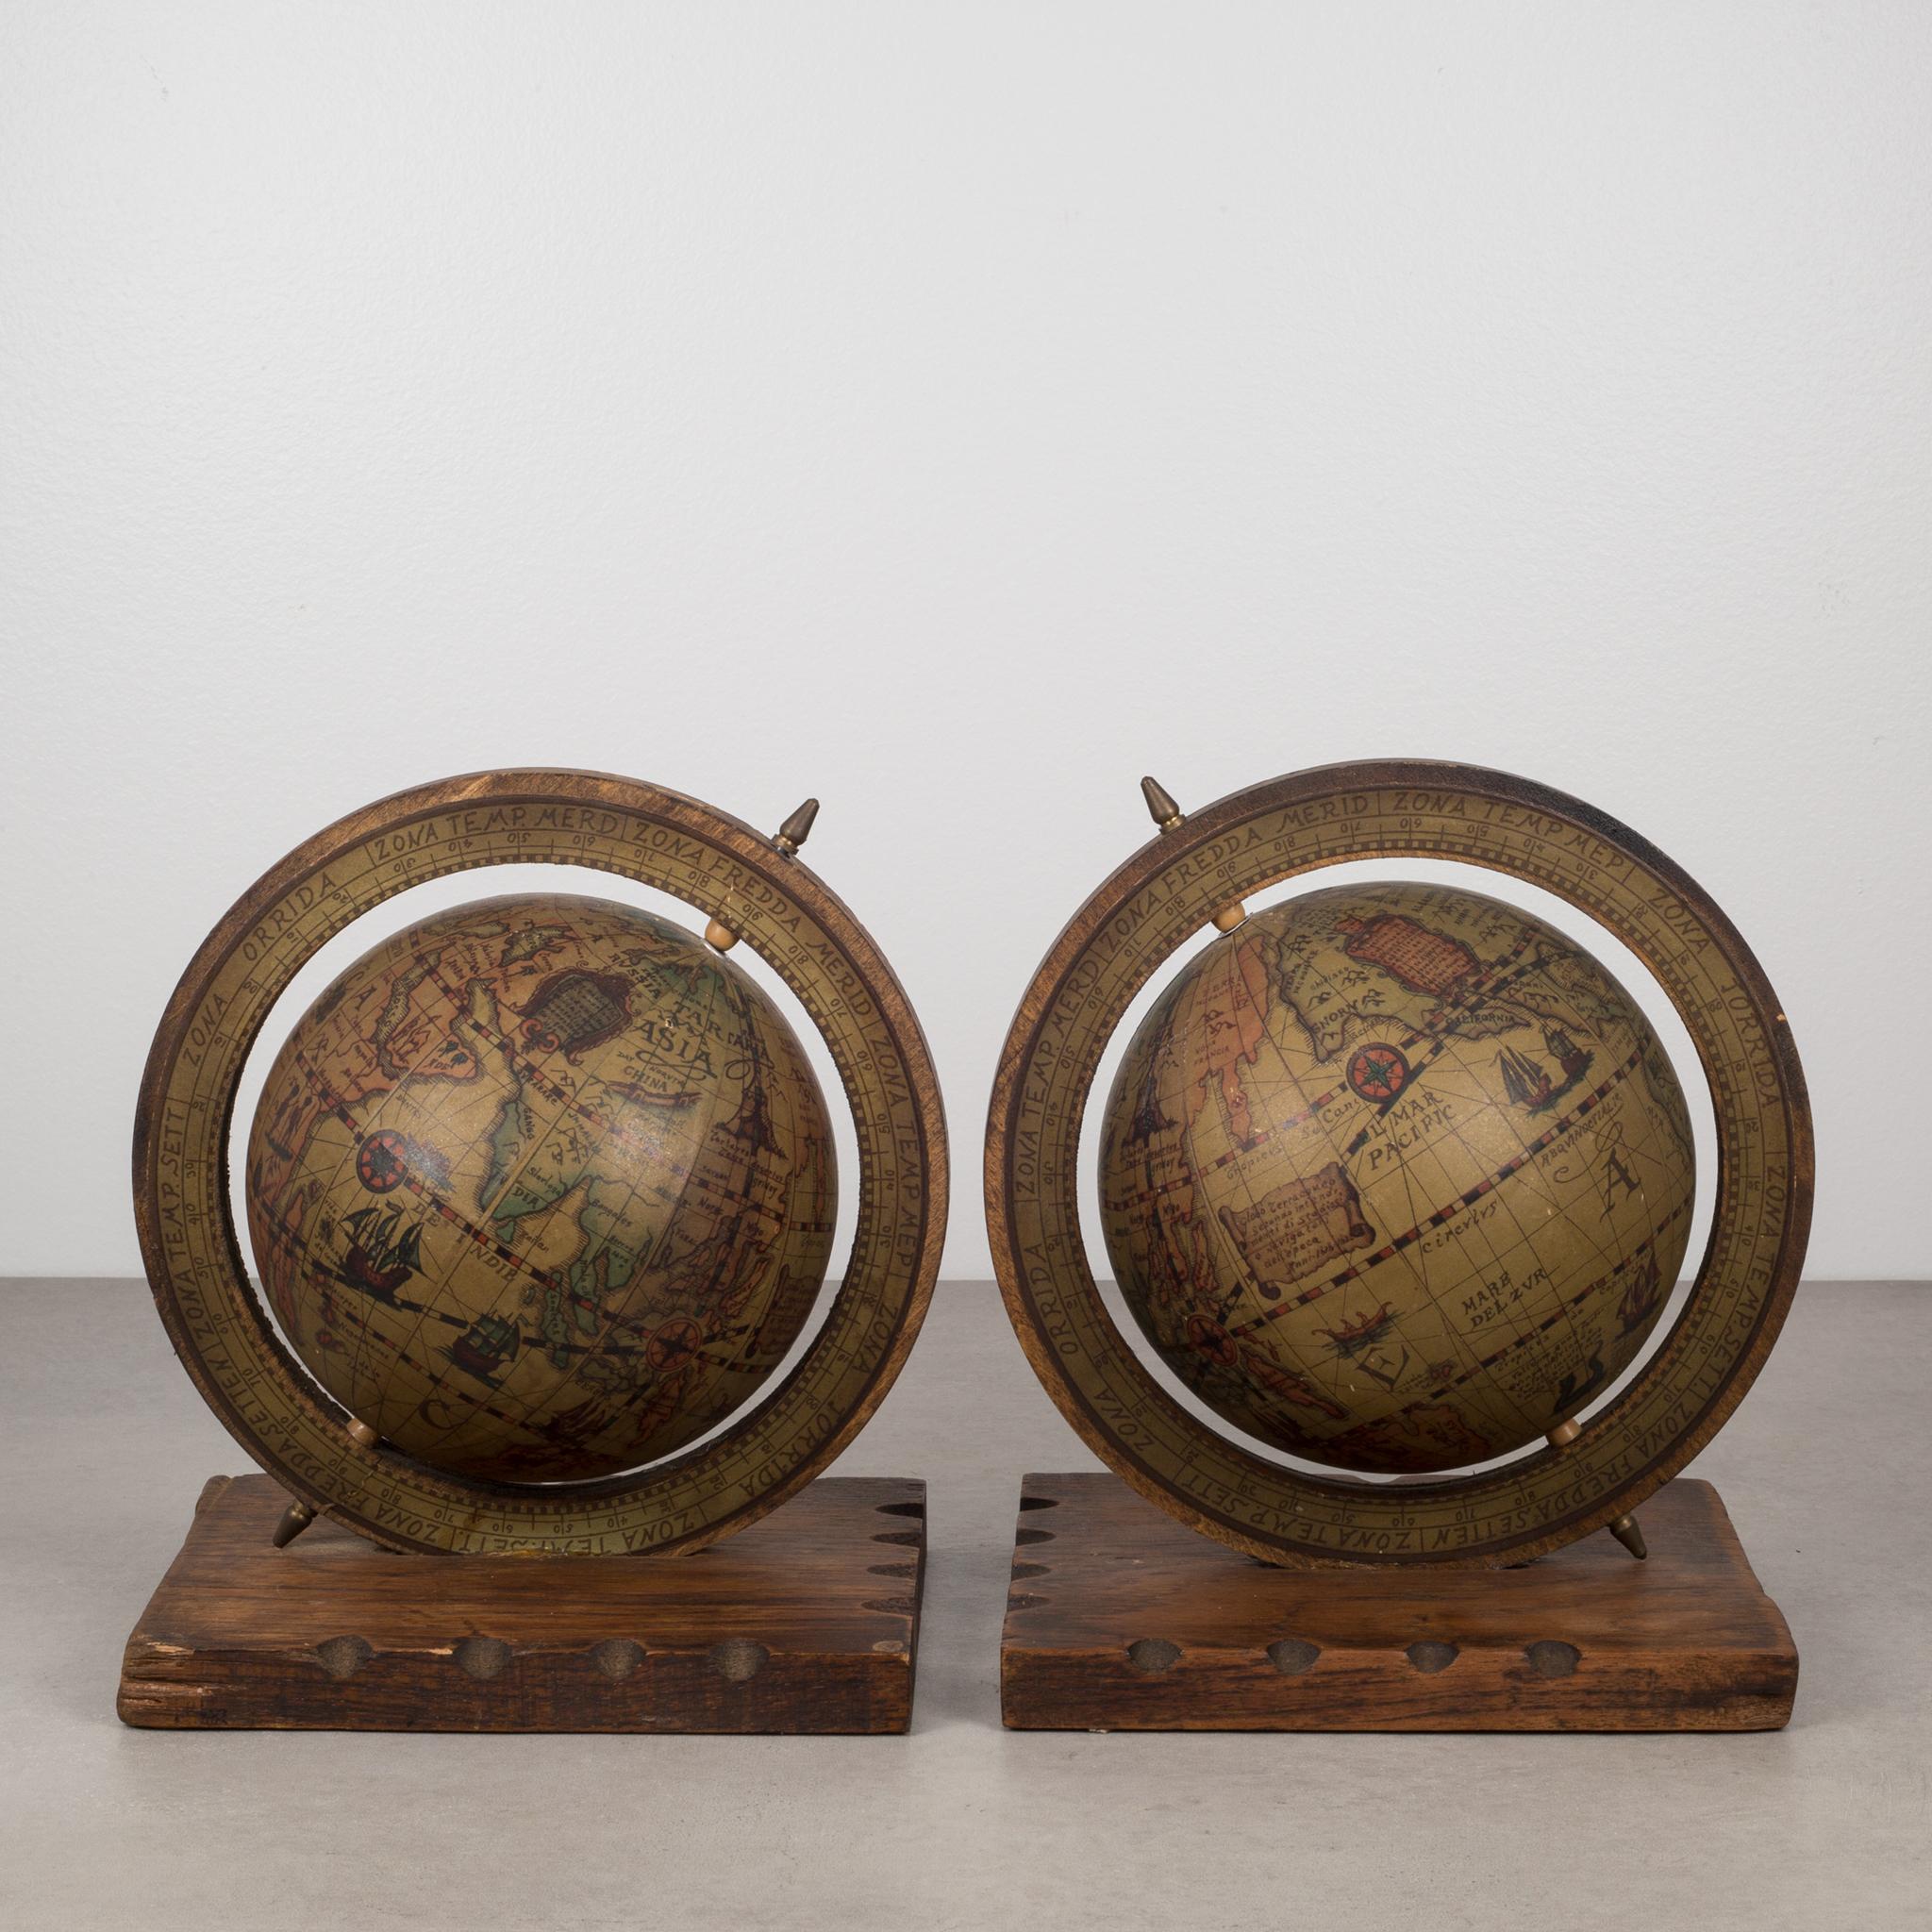 Pair of globe bookends mounted on a rustic, notched wooden base. The globes appear to be metal wrapped in paper. Both globes rotate on their axis. The axis tips are brass on both ends. Original green felt on the bottom.